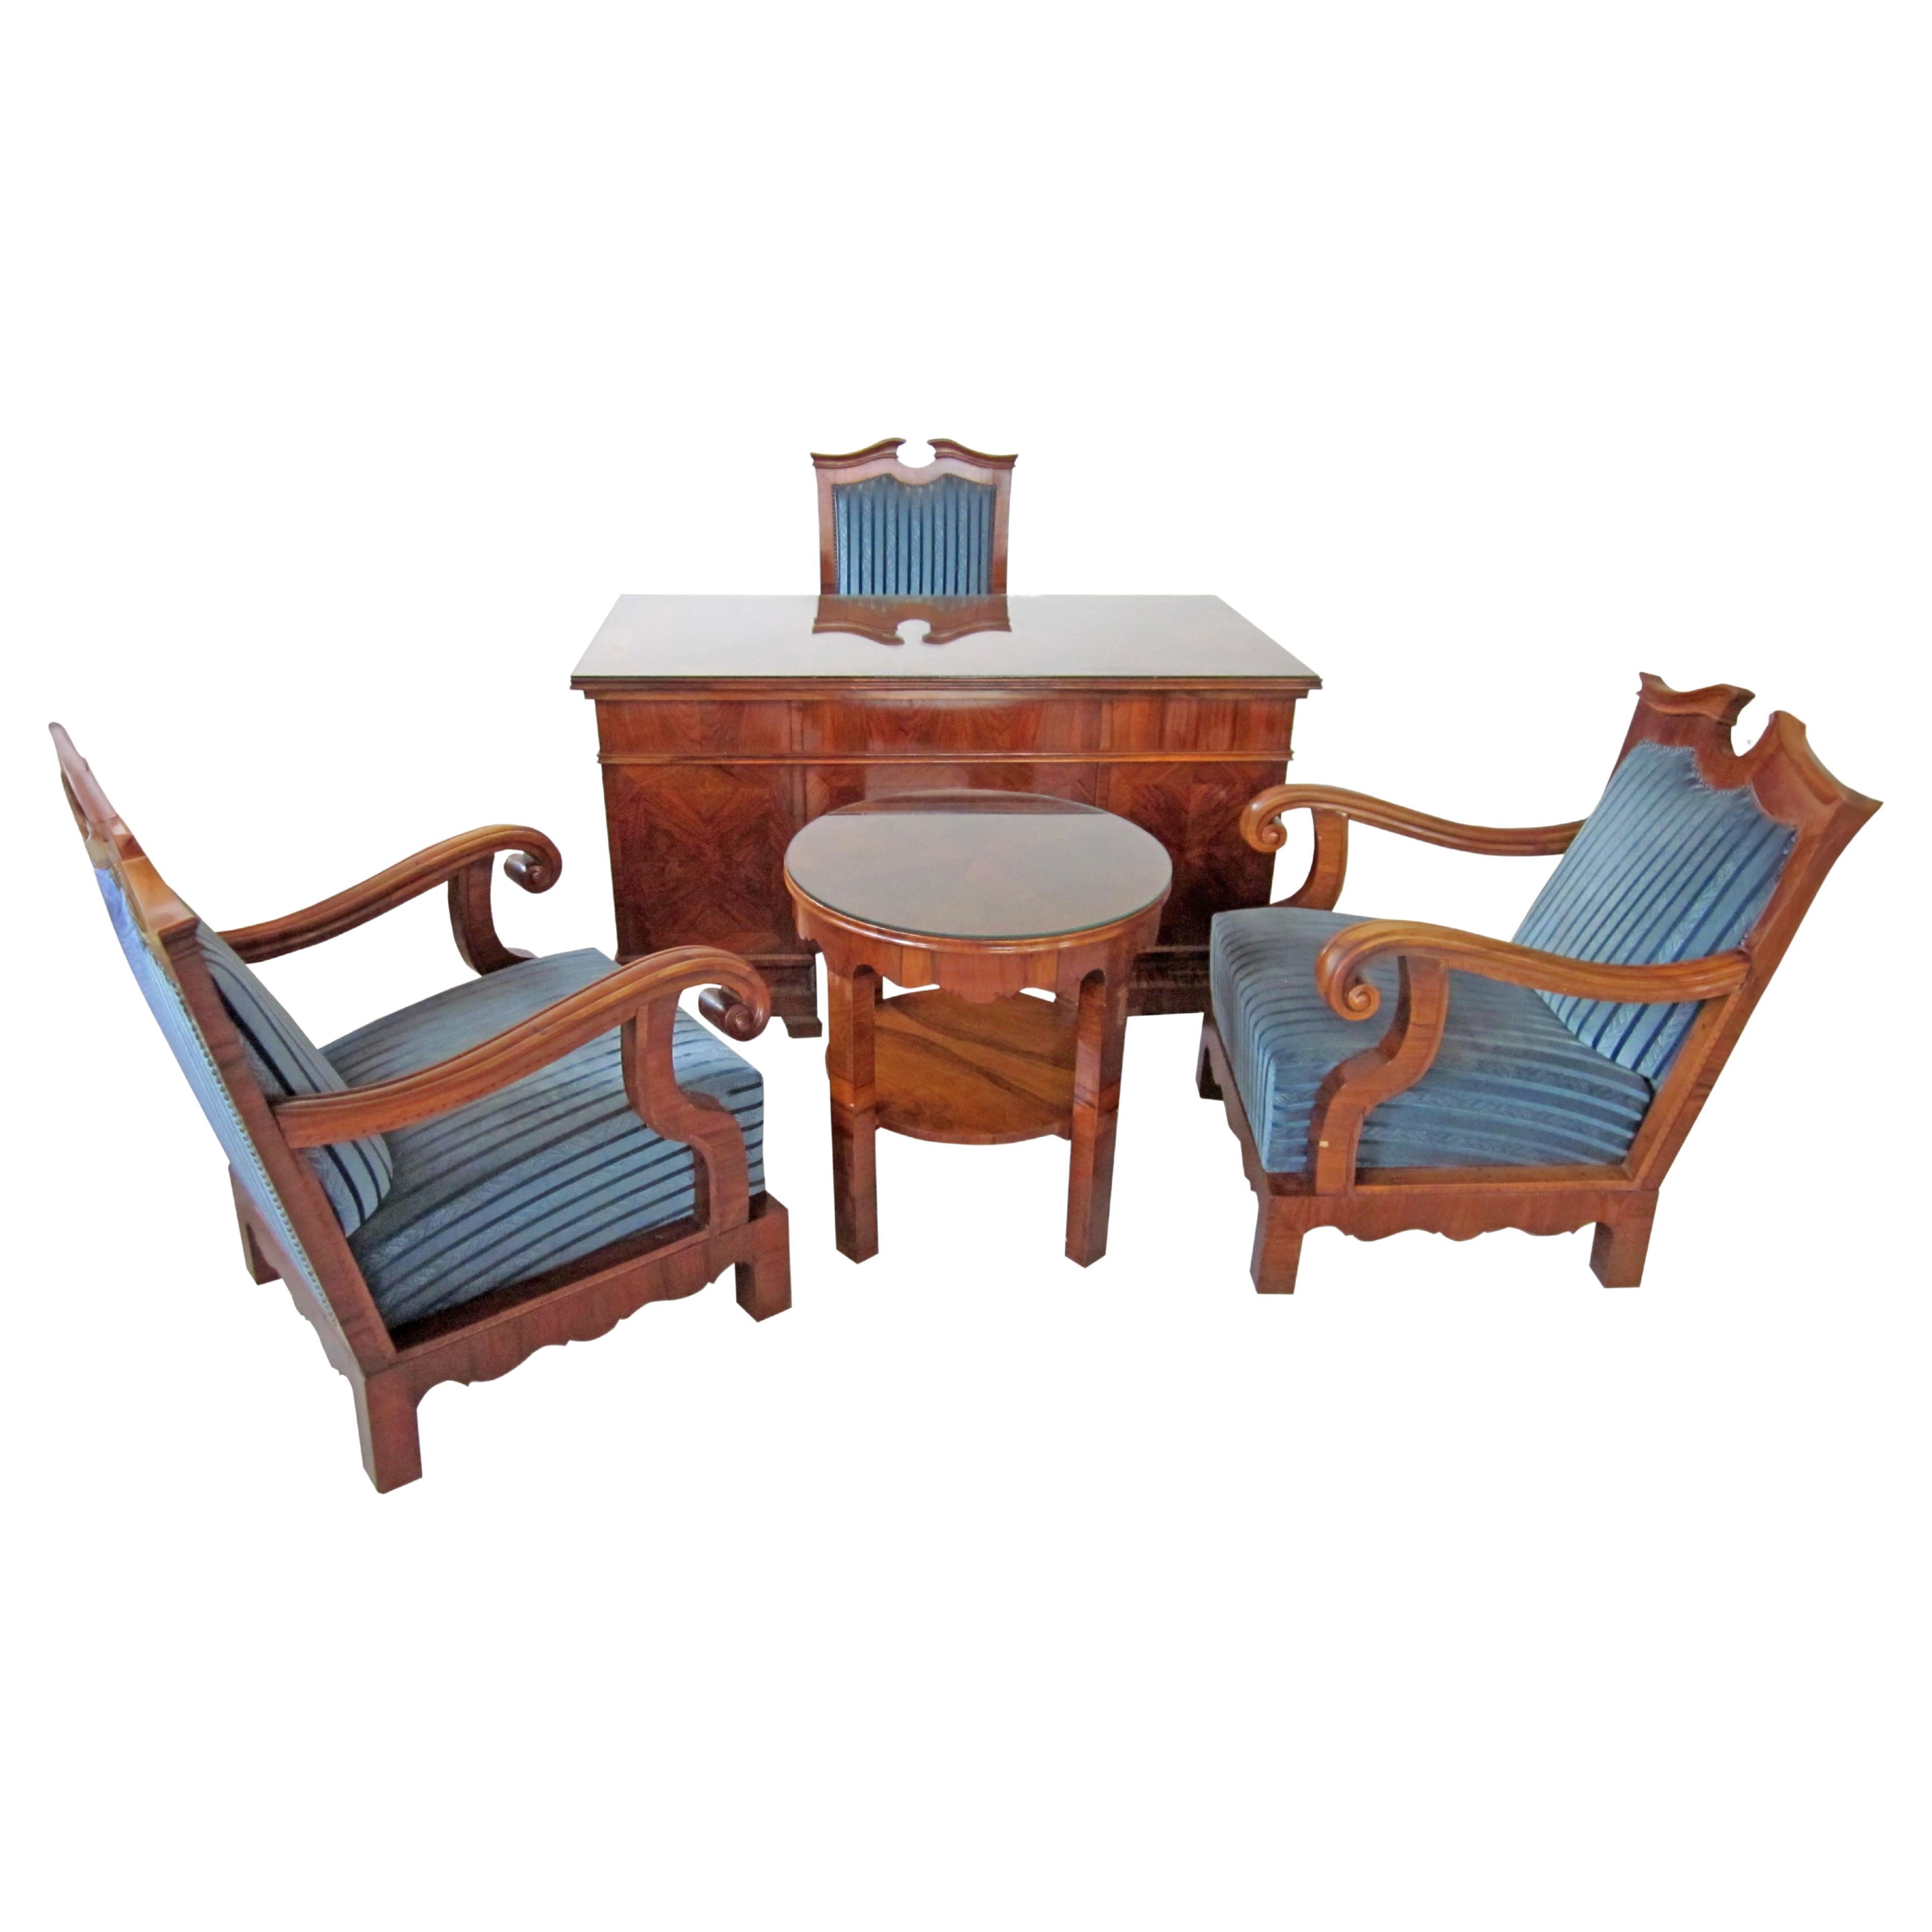 Late 19th Century Office Furniture Set - 1 Writing Desk, 1 Table, 3 Armchairs